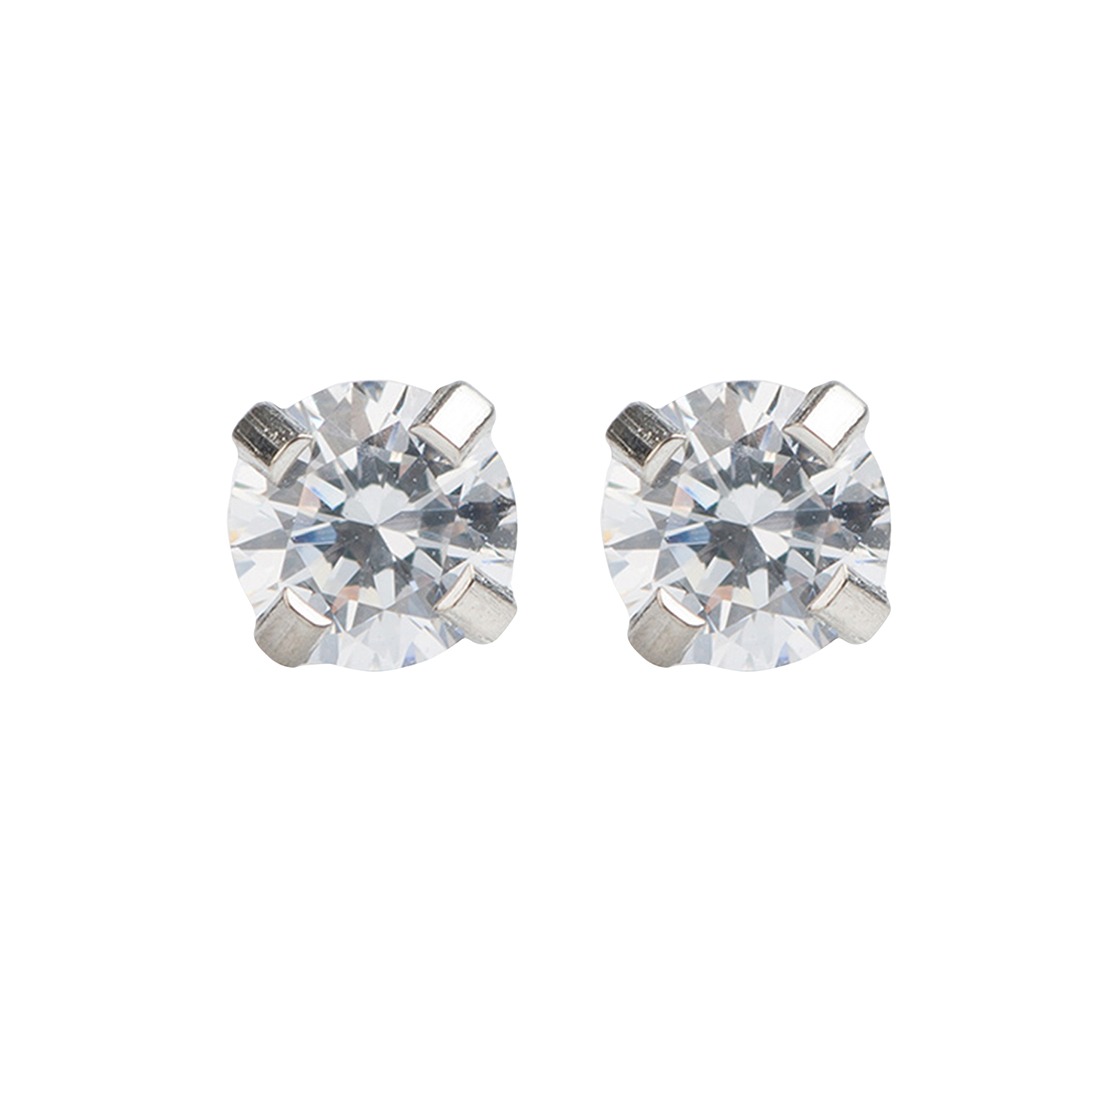 4MM - Cubic Zirconia (Round) - Crystal Clear | Stainless Steel Piercing Earrings with Instrument | Studex System75